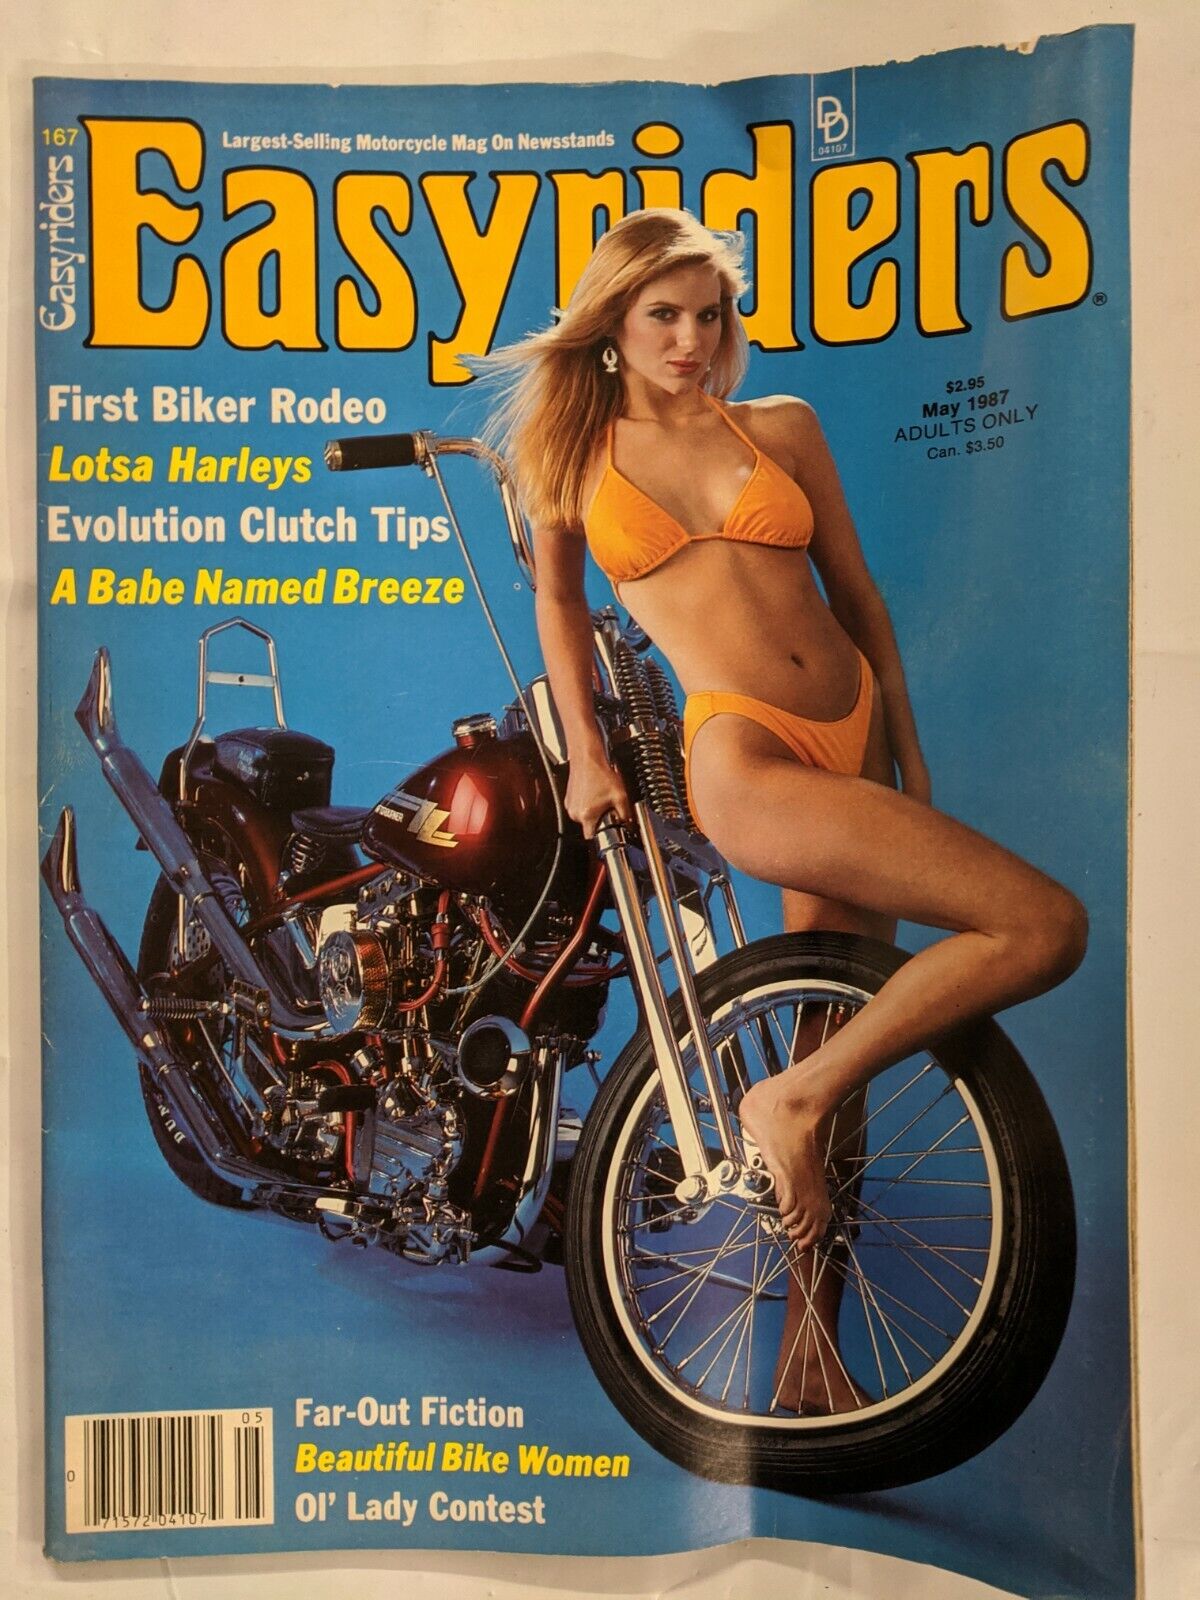 annelize posthumus recommends beautiful woman easy rider magazine pic